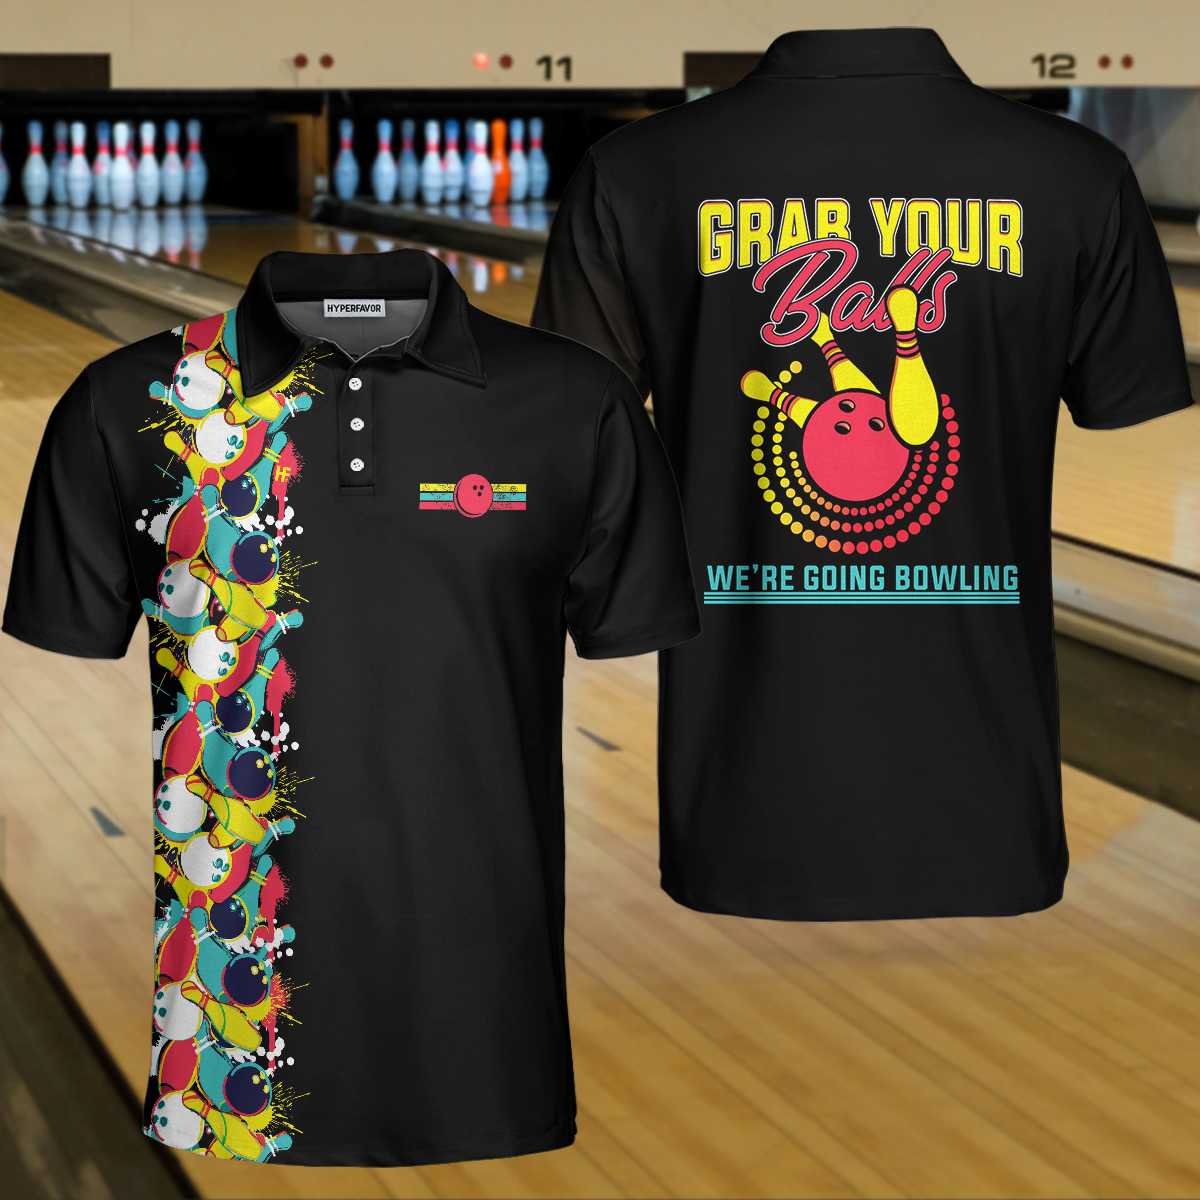 Grab Your Balls We Are Going Bowling Polo Shirt/ Black Bowling Shirt For Men Coolspod